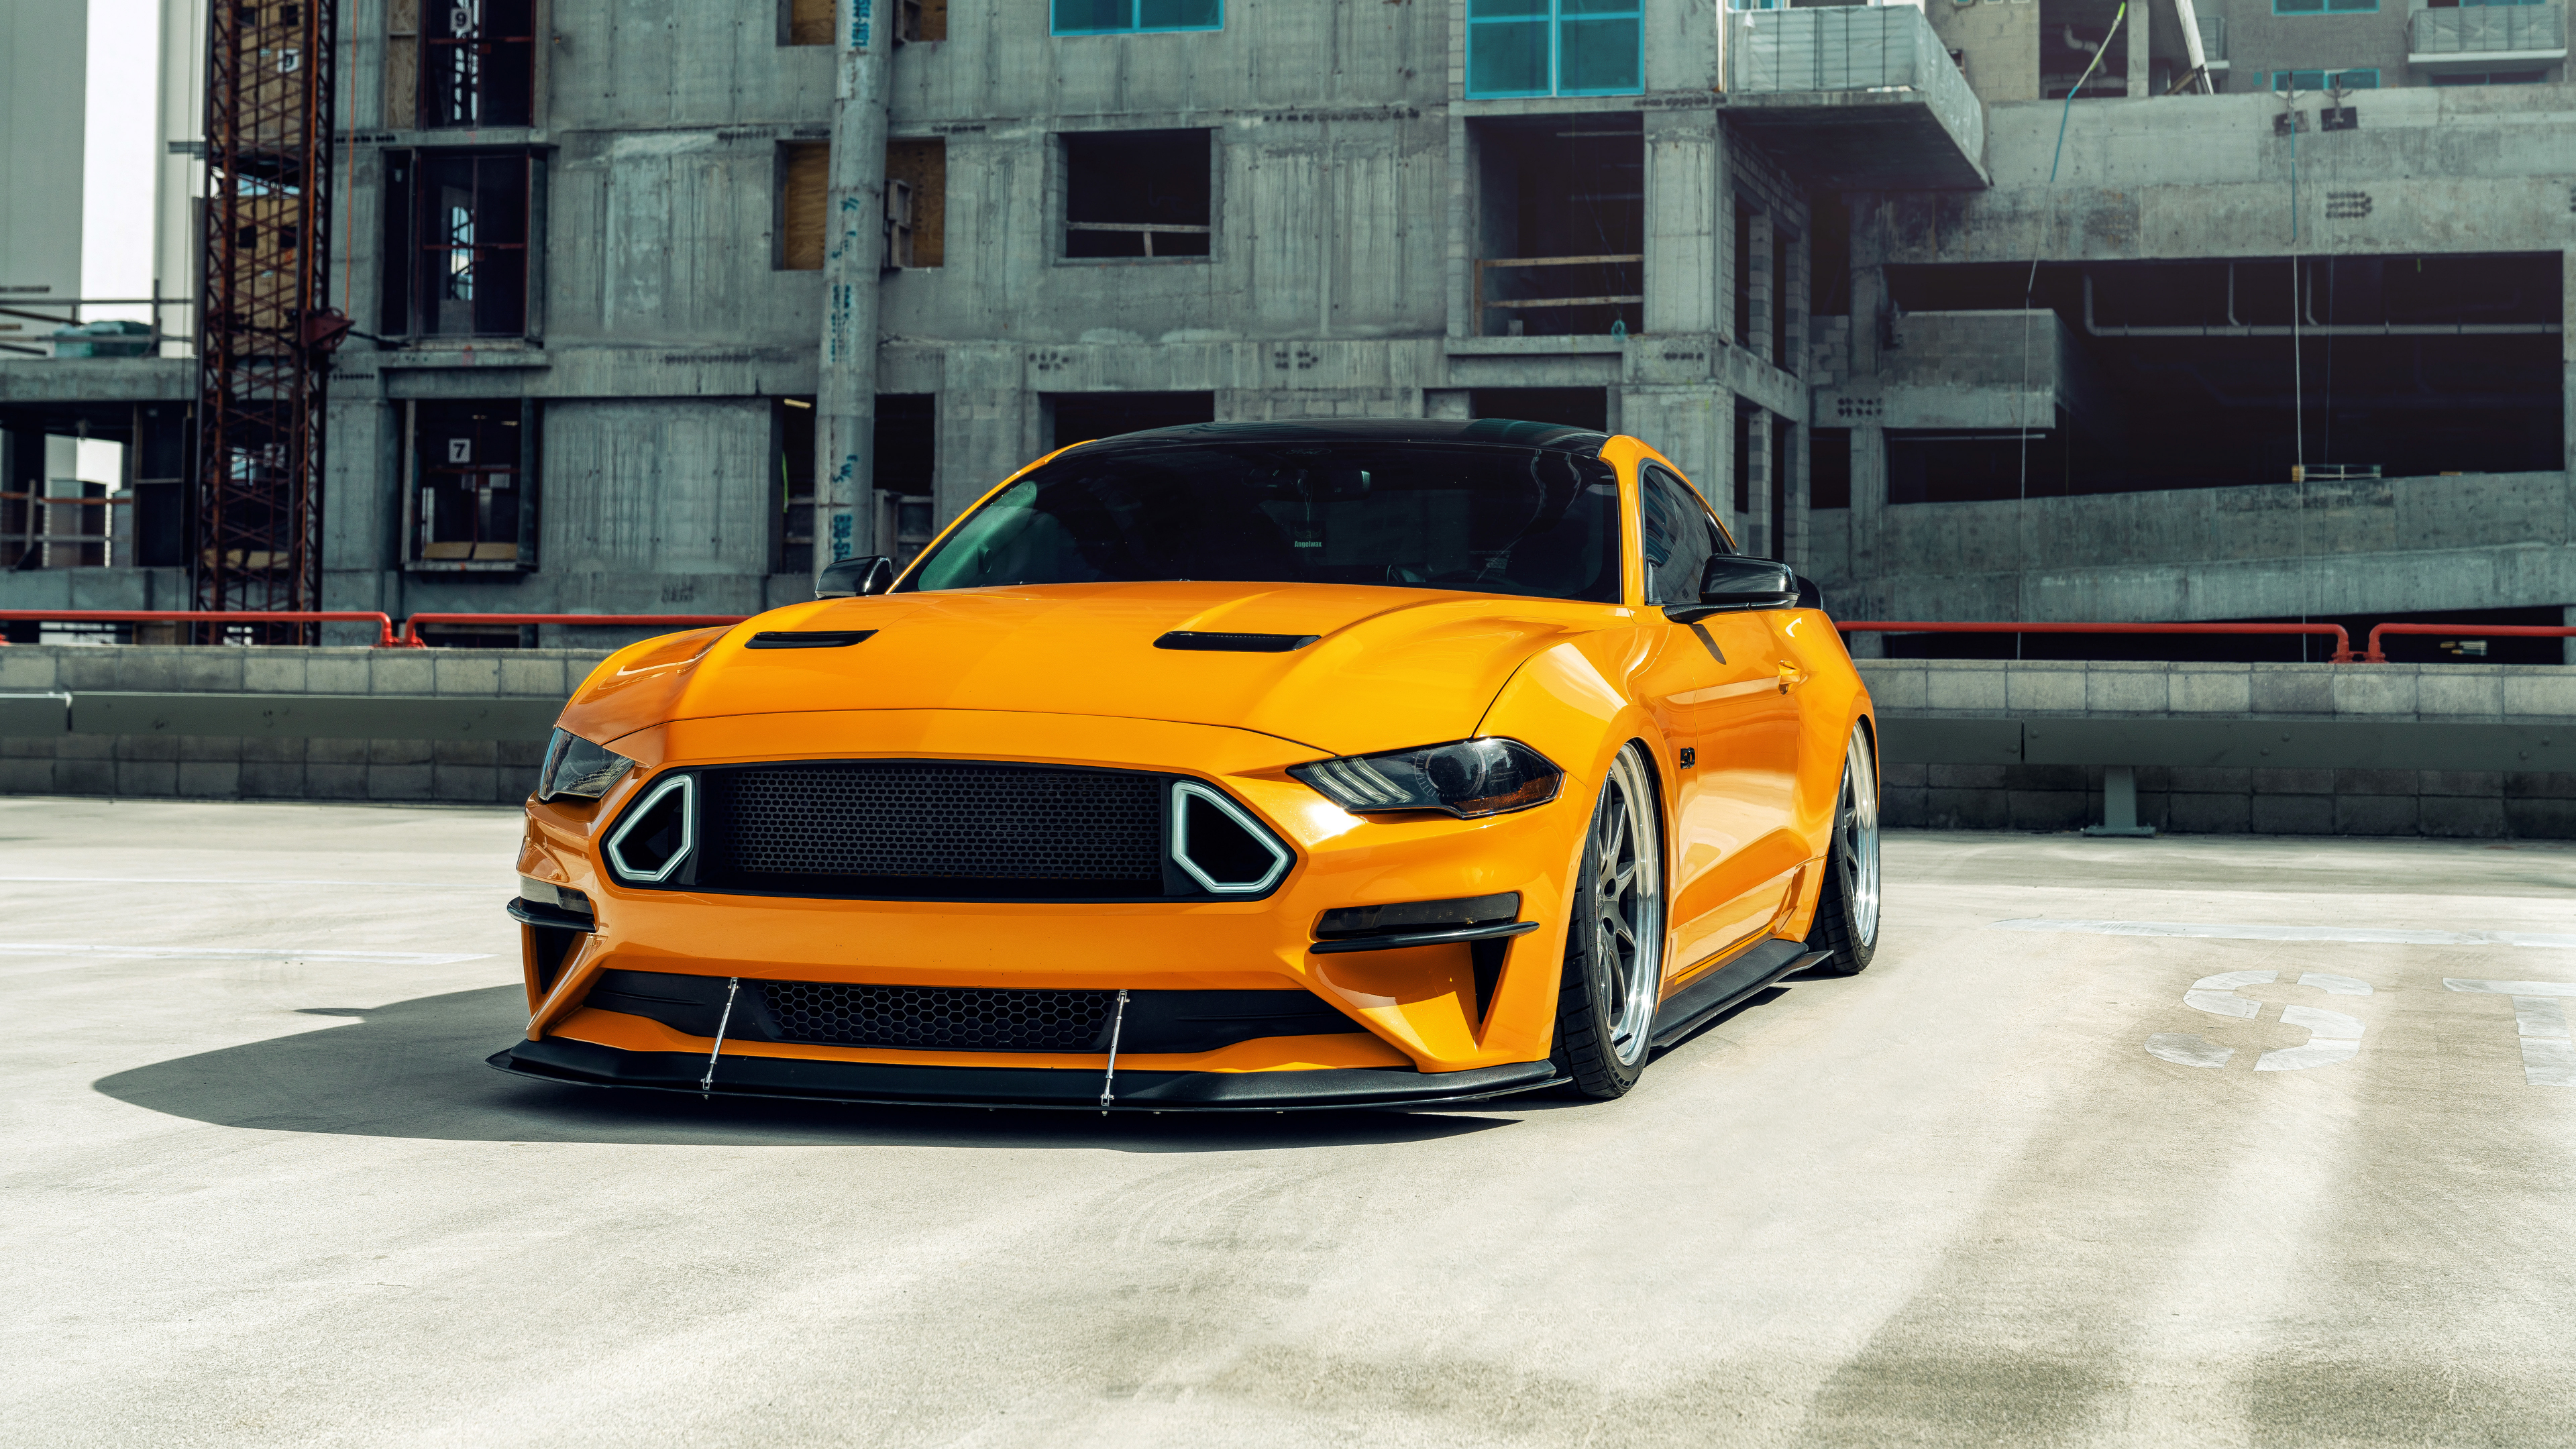 Yellow Ford Mustang GT, 2020, 3840x2160 wallpaper